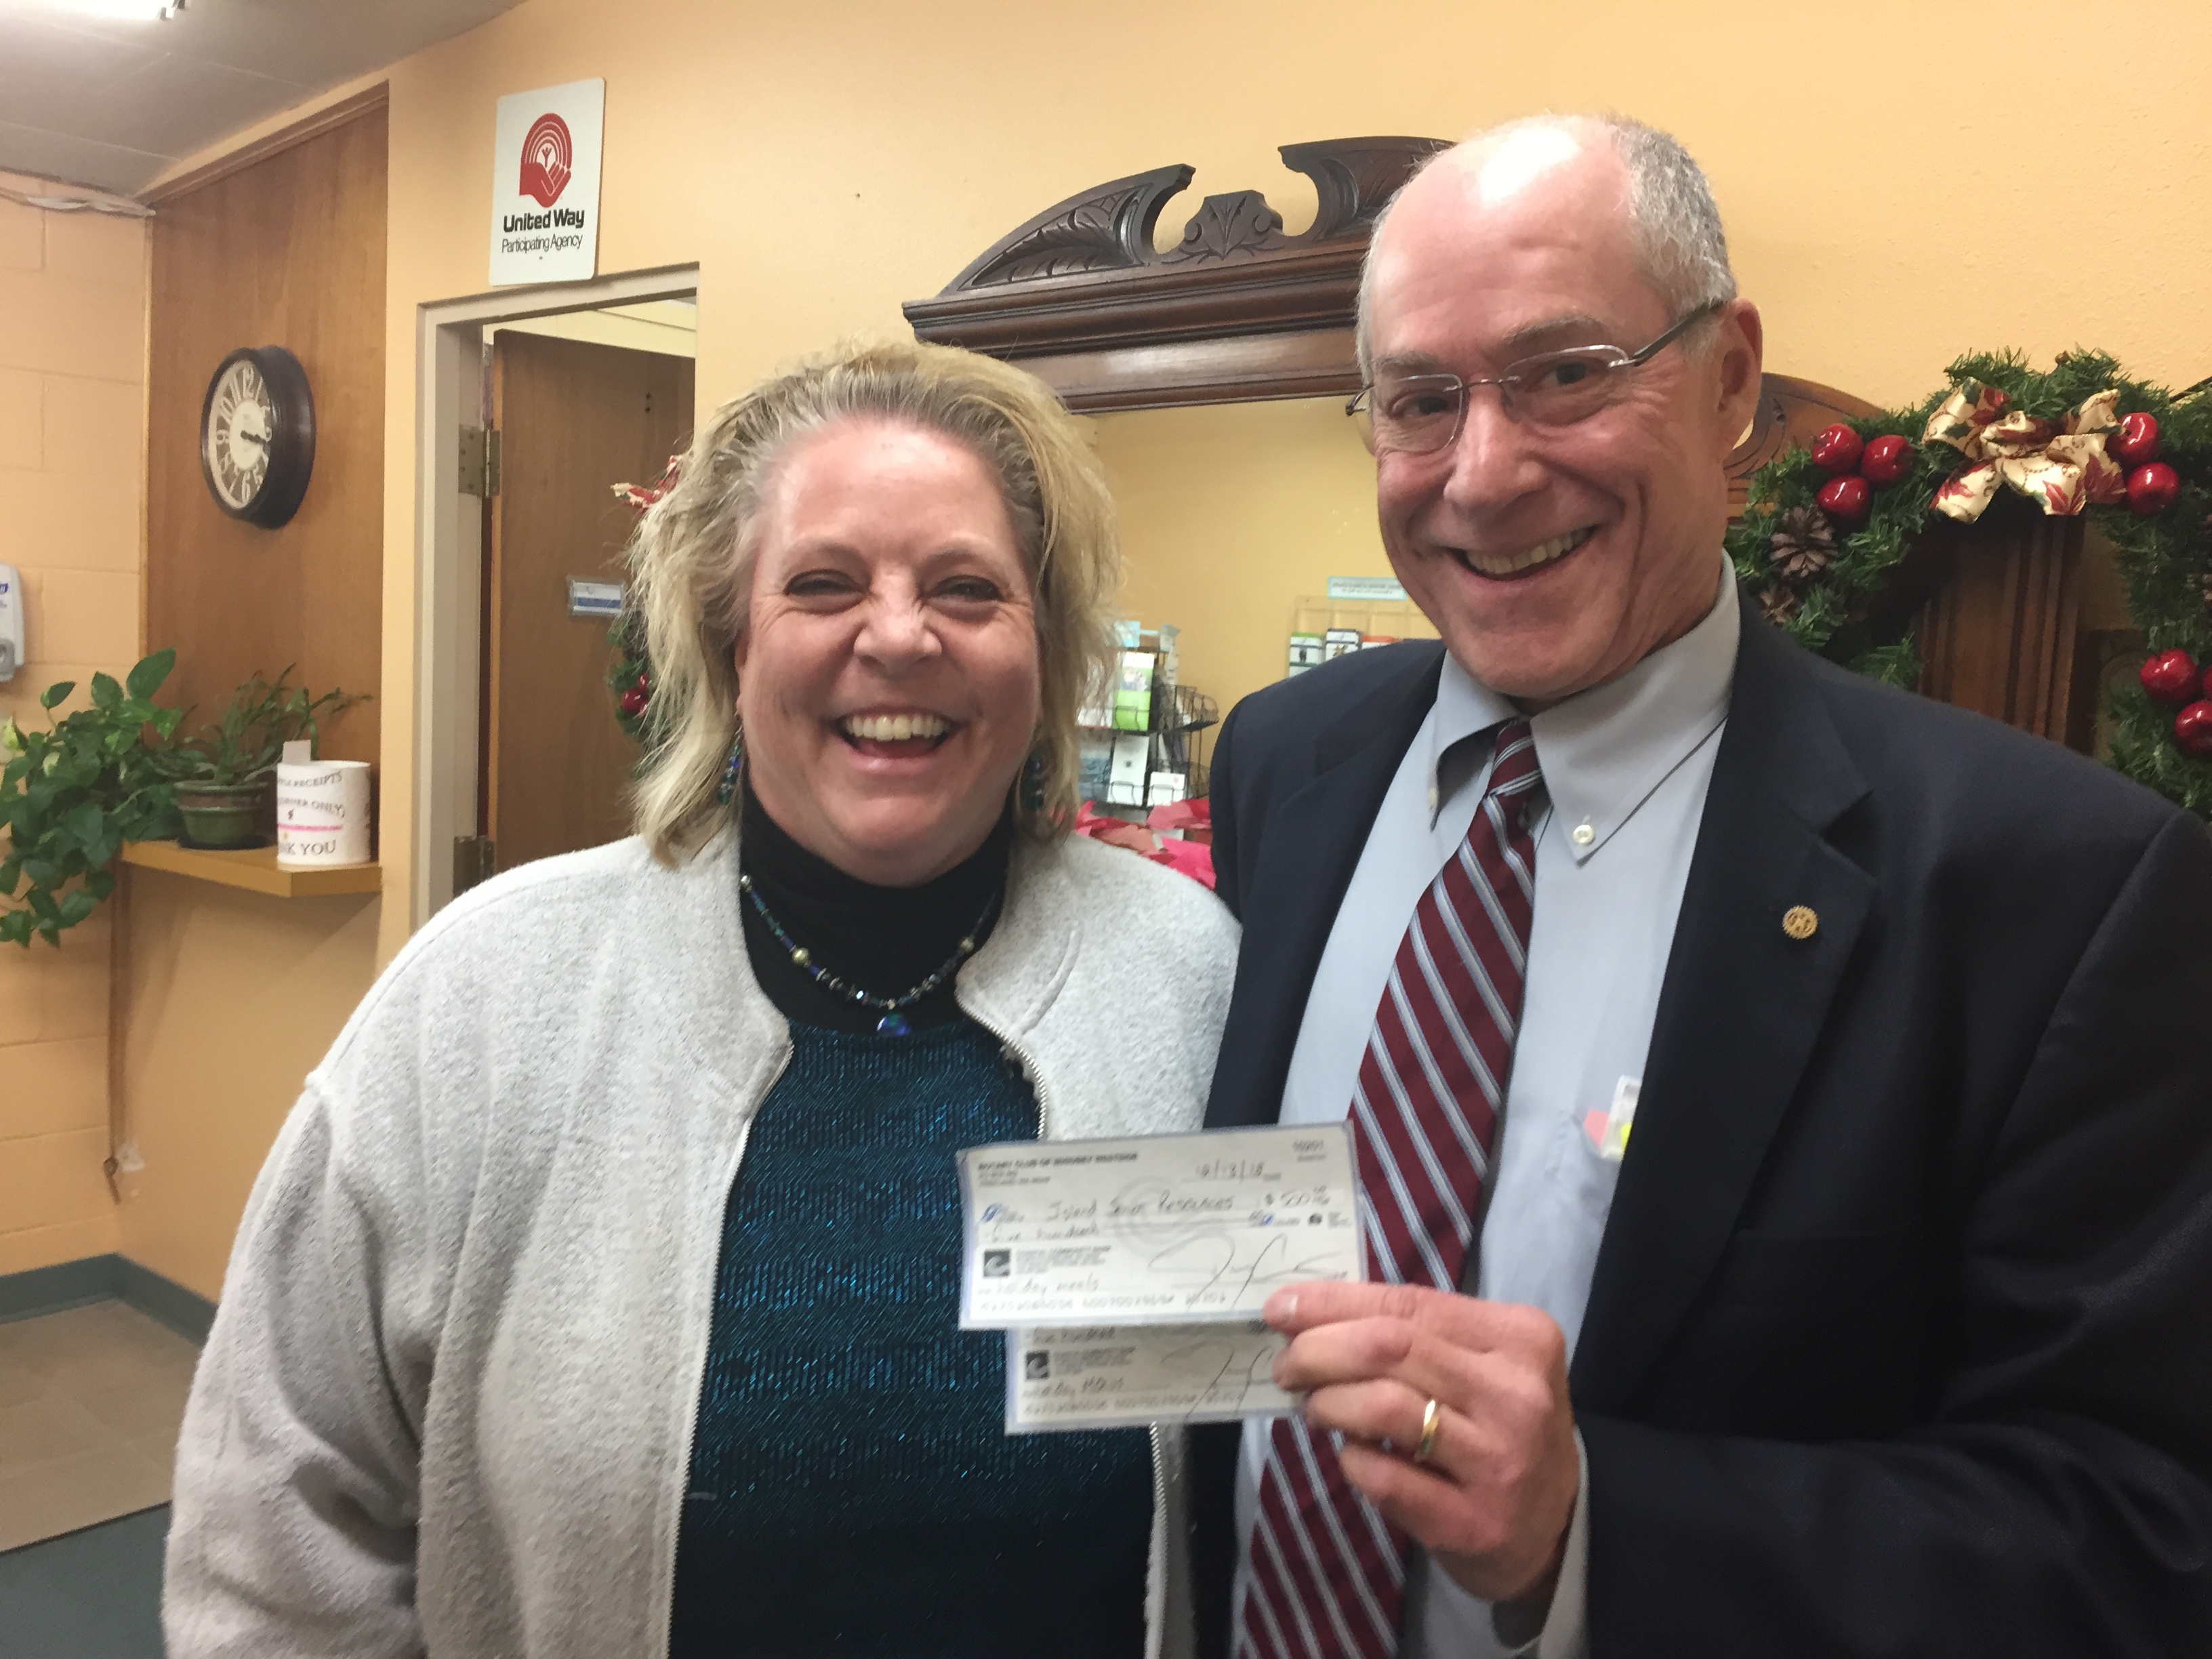 Thank you Rotary Club Whidbey Westside!